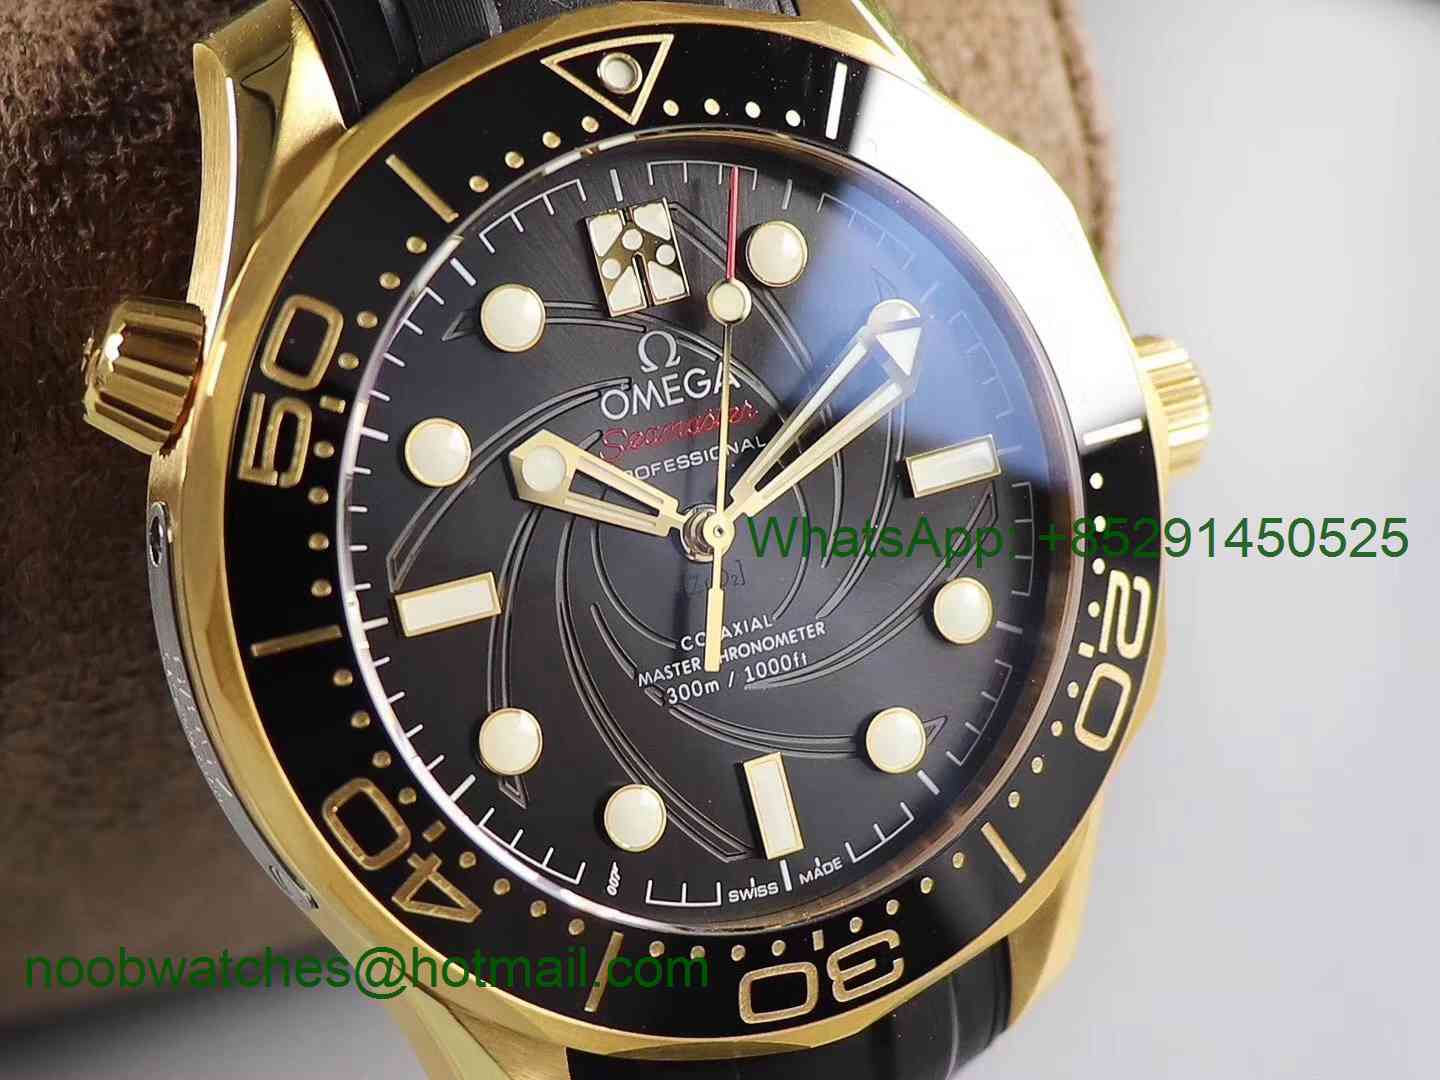 Replica OMEGA Seamaster Diver 300M Yellow Gold 007 James Bond VSF 1:1 Best Edition on Black Rubber Strap A8807